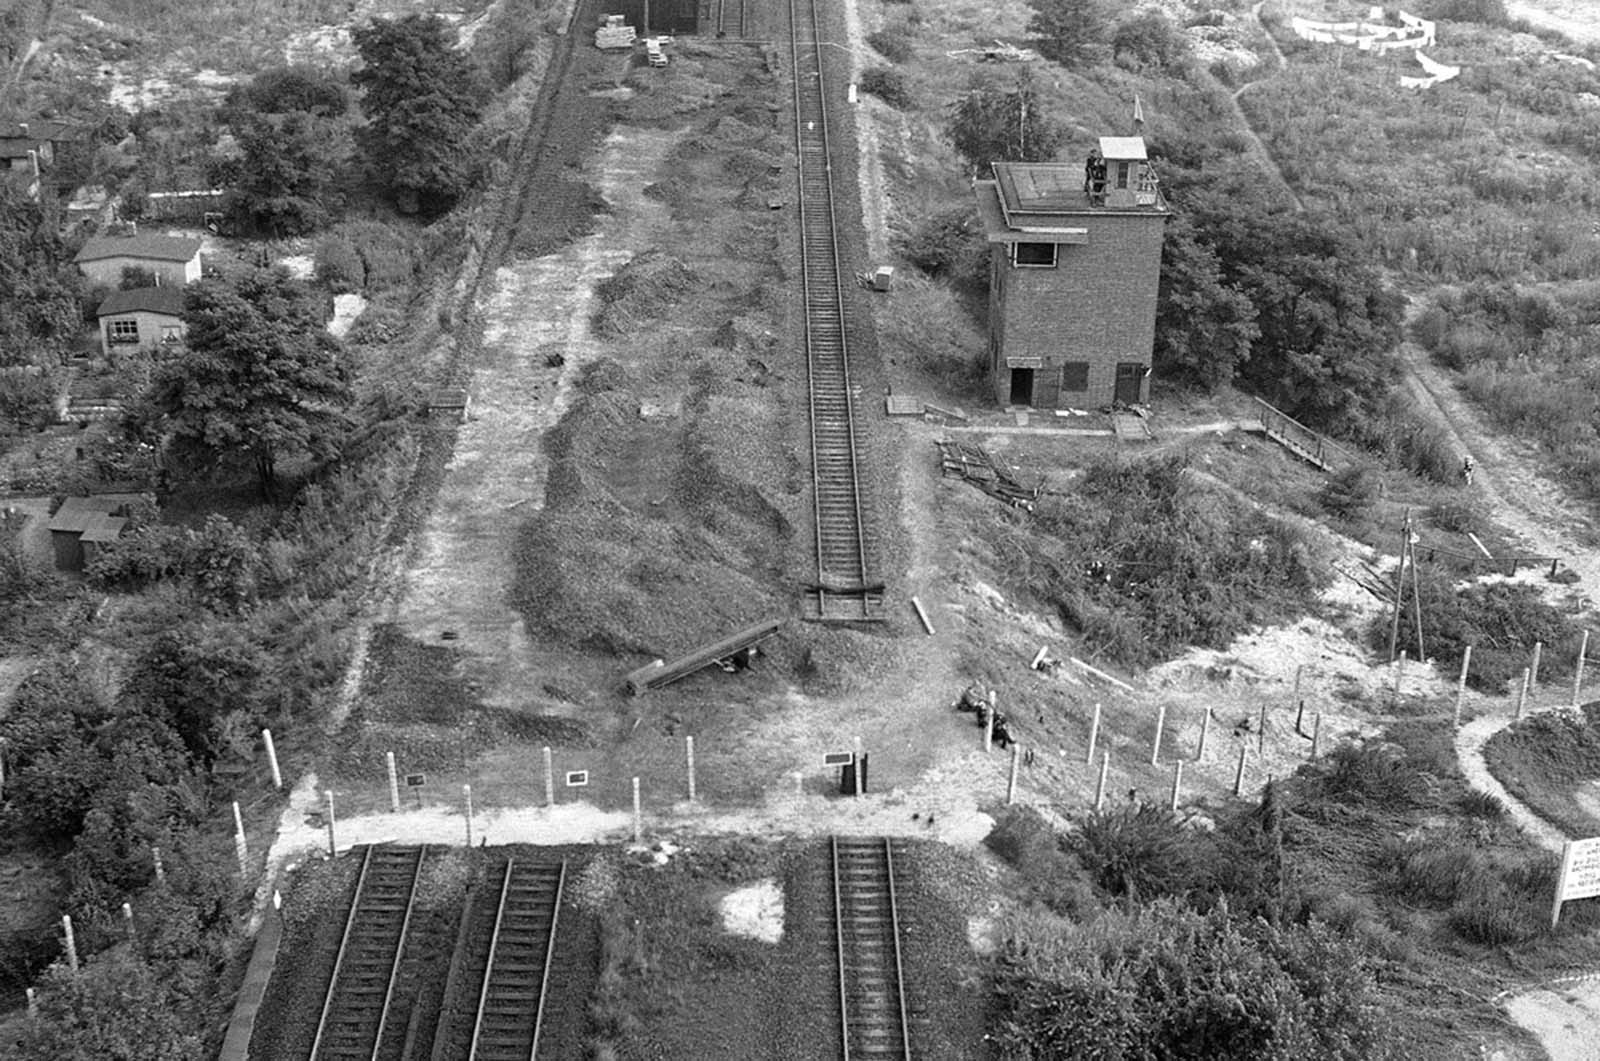 Tracks of the Berlin elevated railroad stop at the border of the American sector of Berlin in this air view on August 26, 1961. B